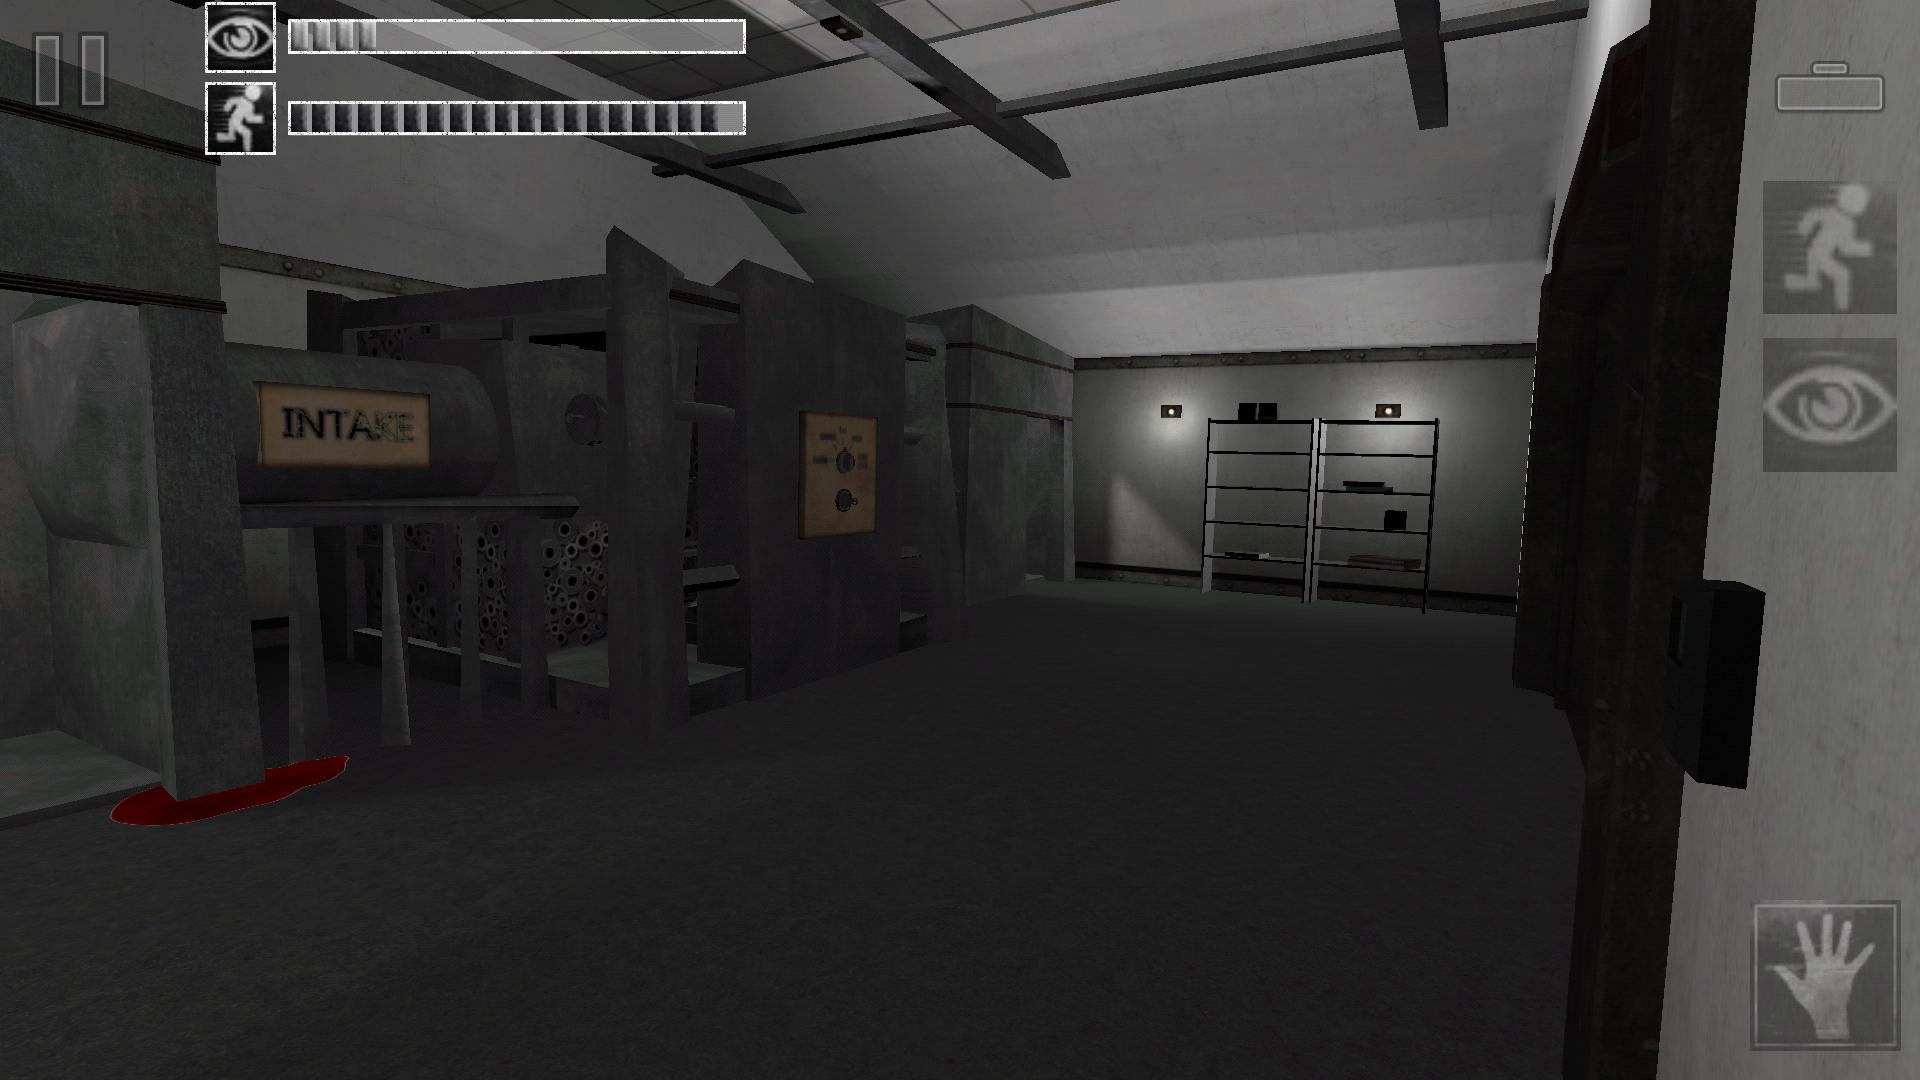 Scp Containment Breach For Android Apk Download - v12 scp containment breach survival ii roblox